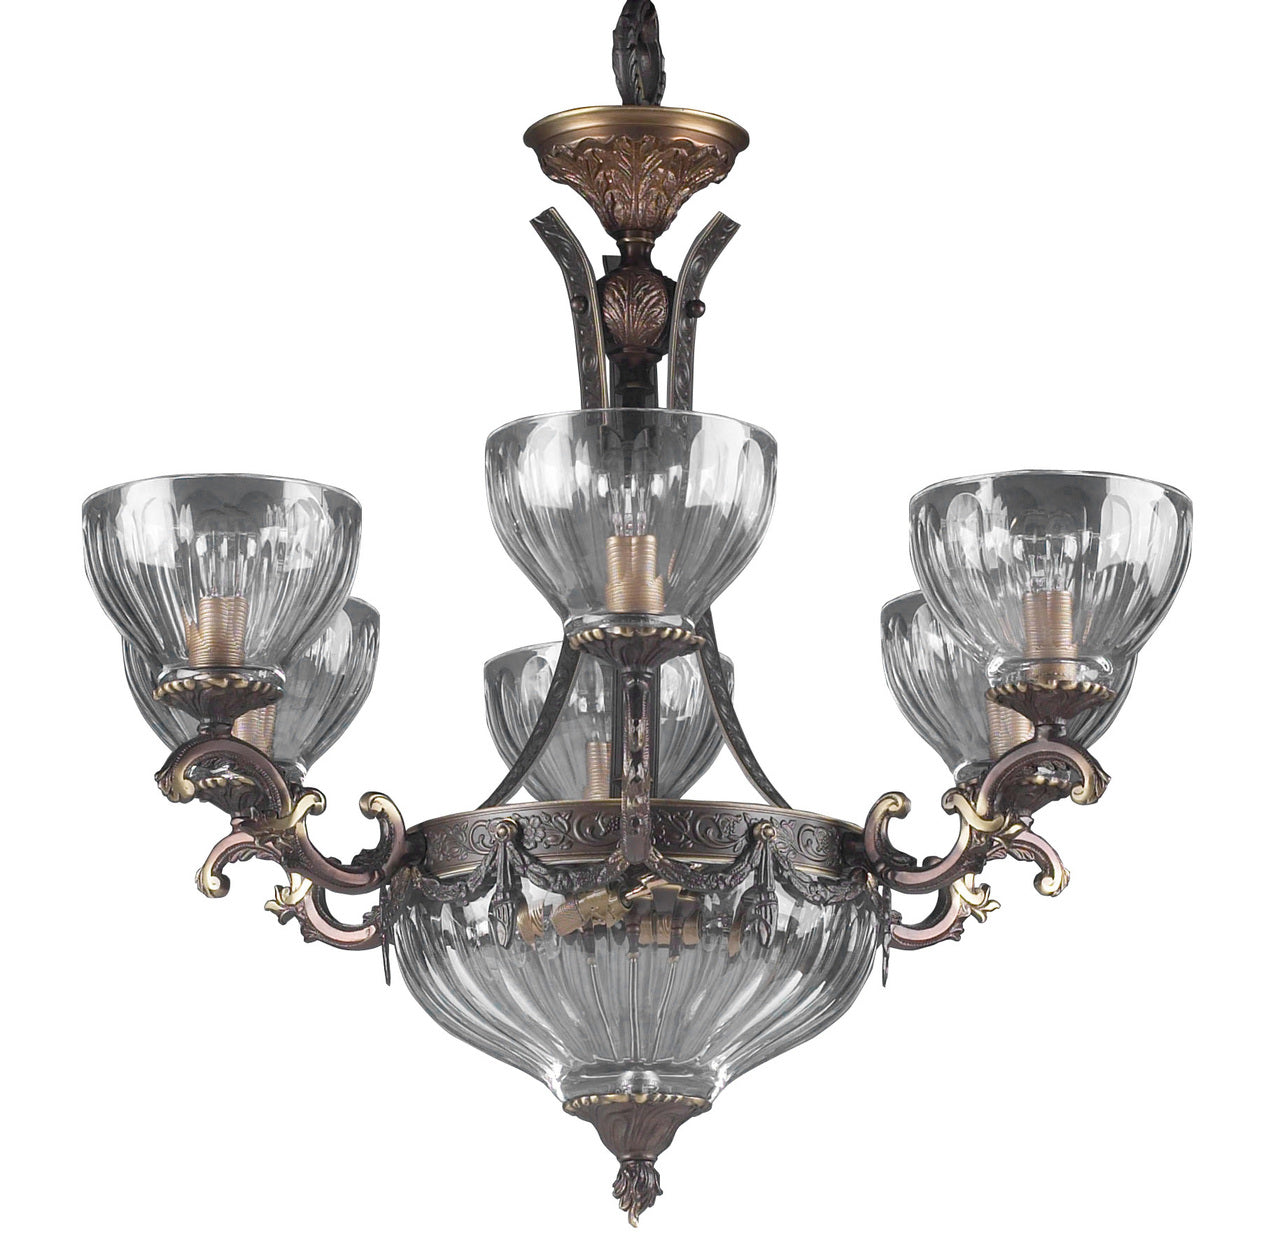 Classic Lighting 55436 RB Warsaw Cast Brass/Lead Crystal Chandelier in Roman Bronze (Imported from Spain)